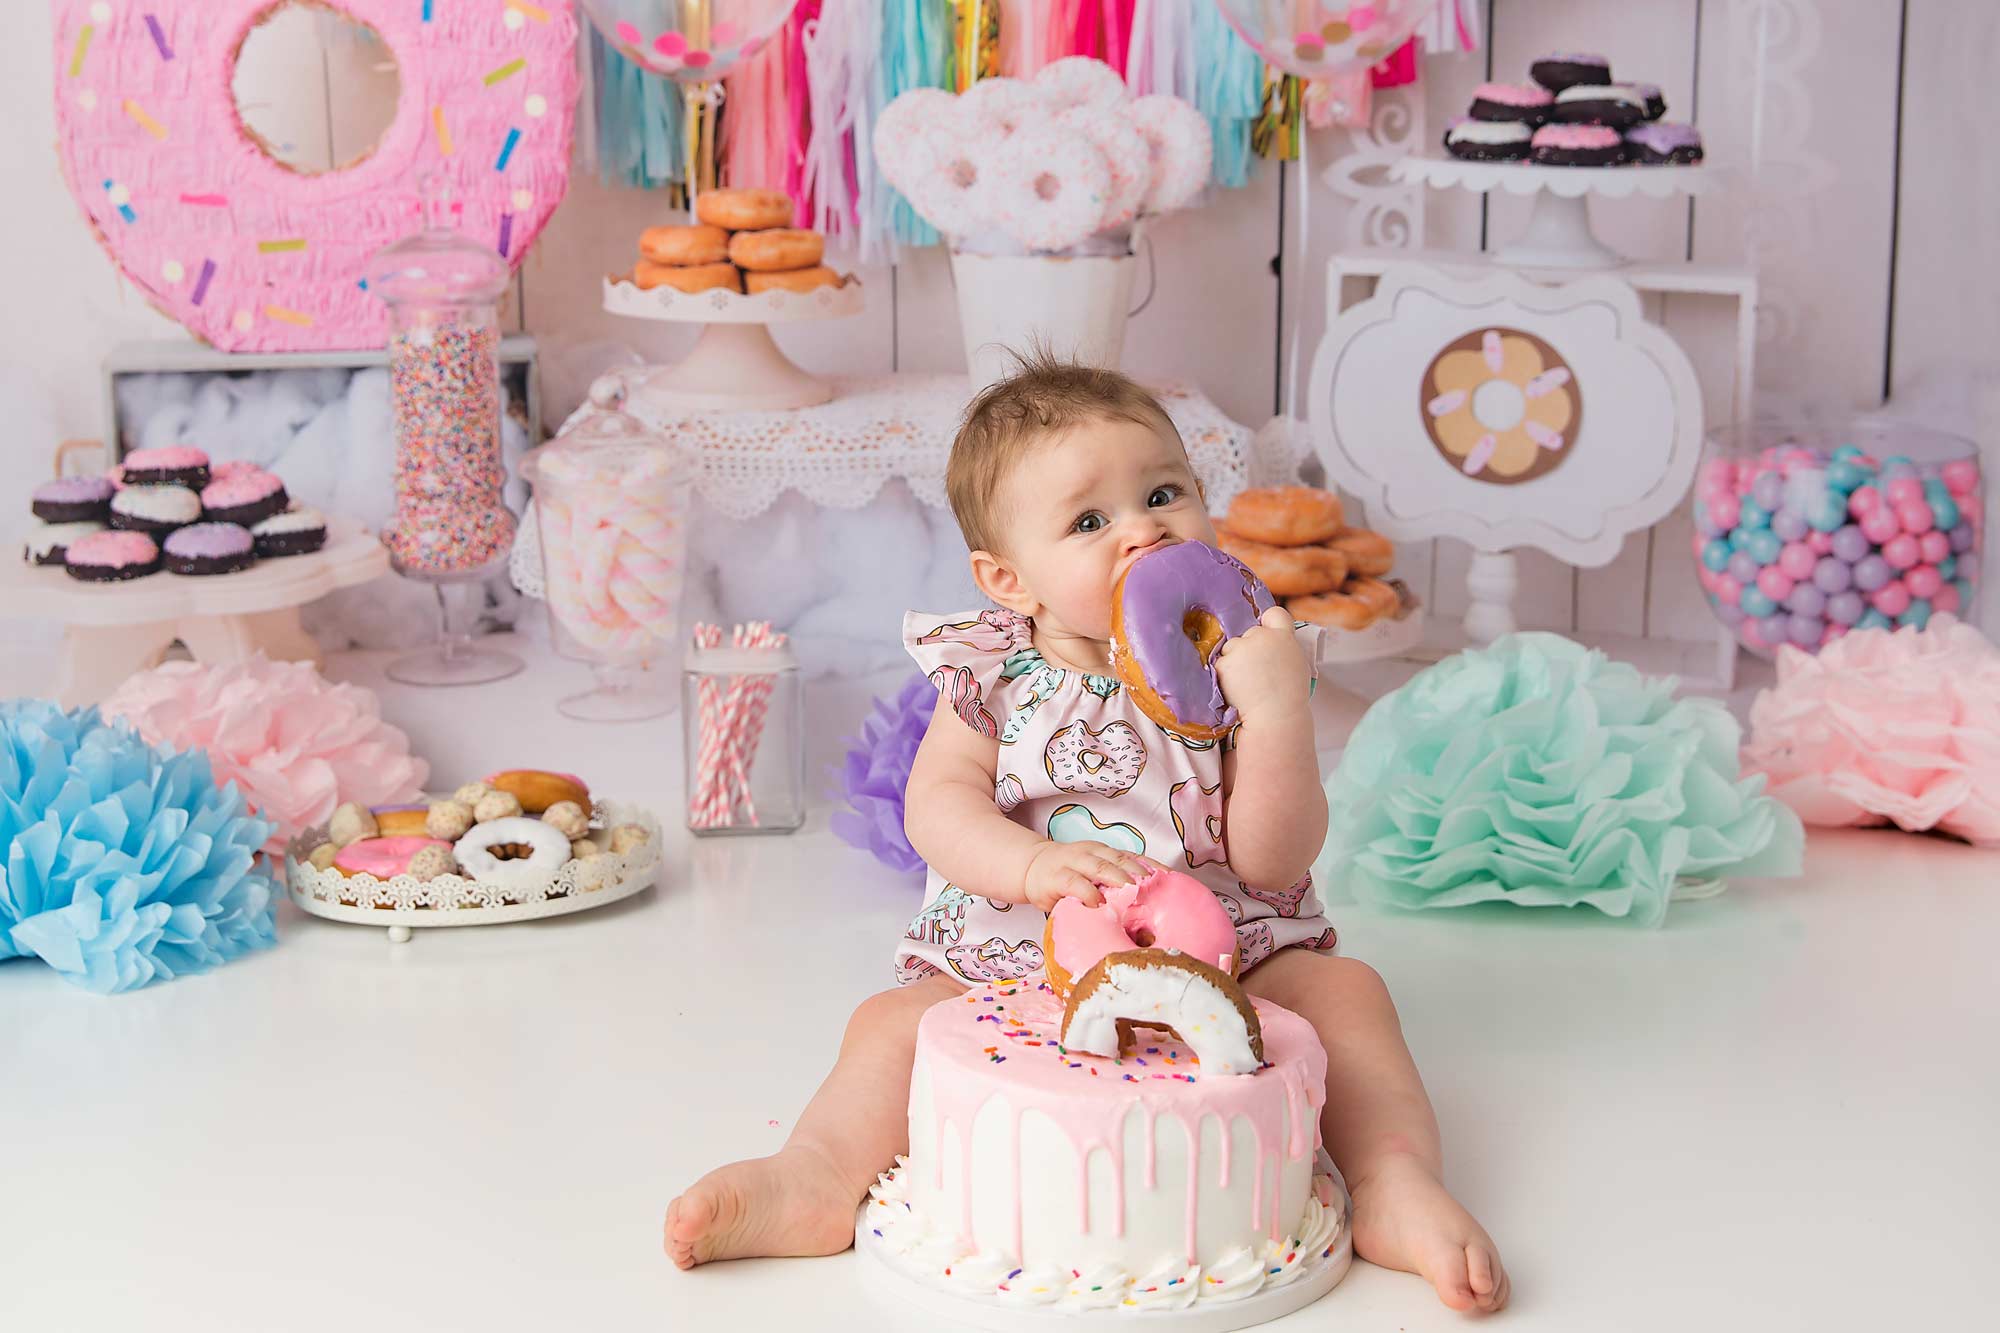 Baby girl eating a donut during donut themed cake smash by Pueblo photographer K.D. Elise Photography.